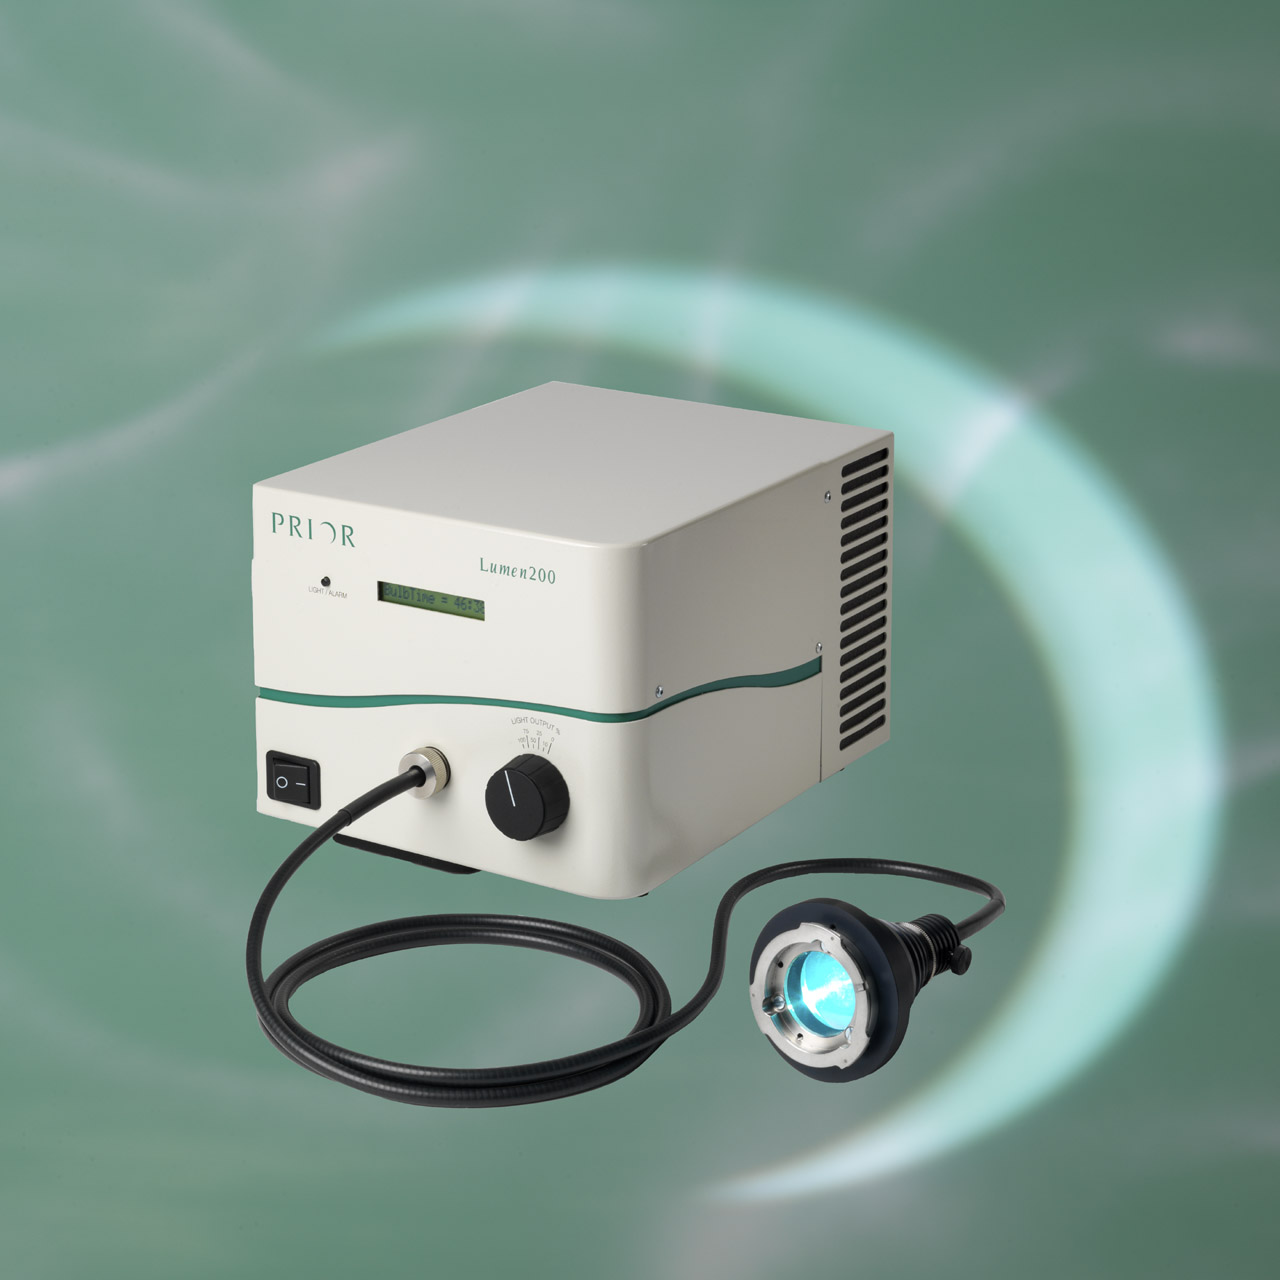 Exciting Illumination for Fluorescence Microscopy in the Shape of the Lumen200 – the brighter, longer lasting, easier to use Fluorescence Illuminator.